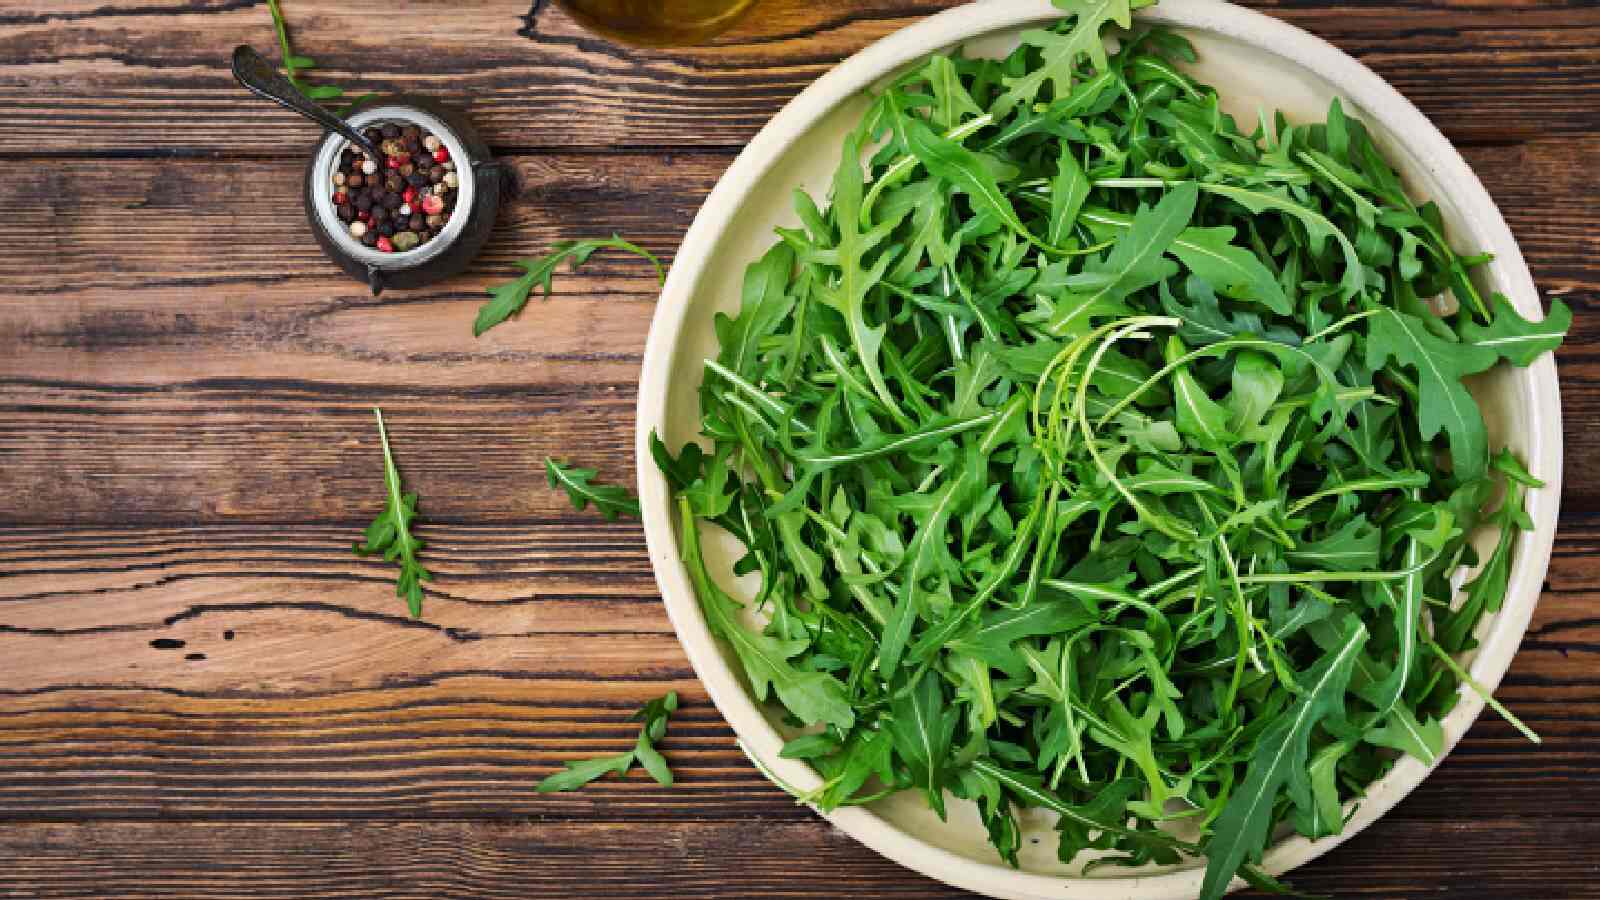 Arugula: Nutrition, Benefits and How to use it